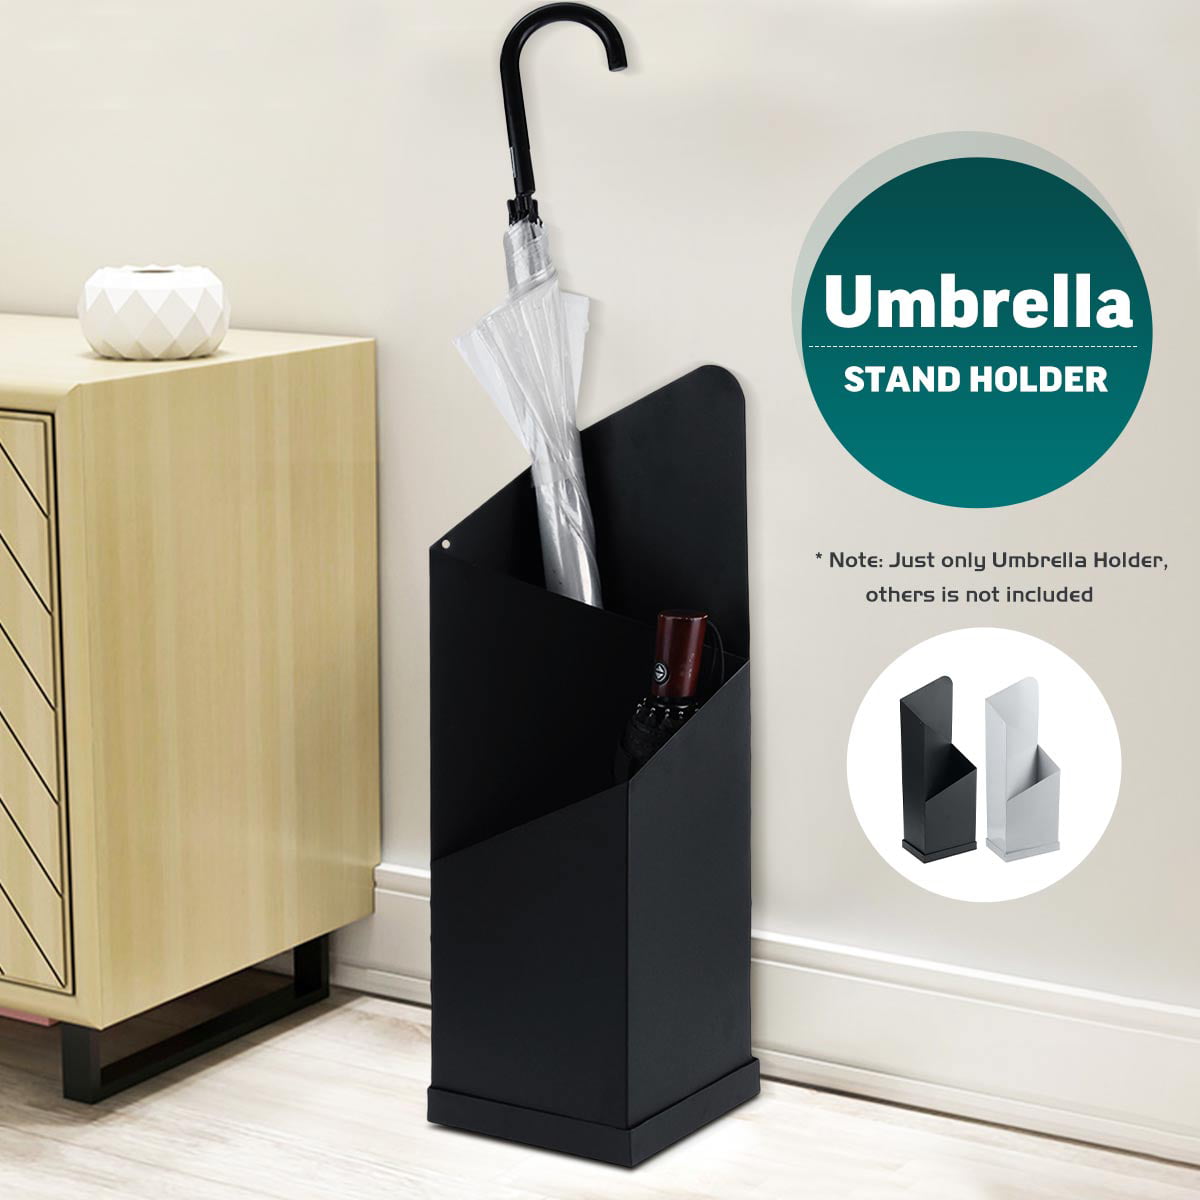 2xGrey Umbrella Rack Stand Holders with Drip Tray Space Saving for Home 